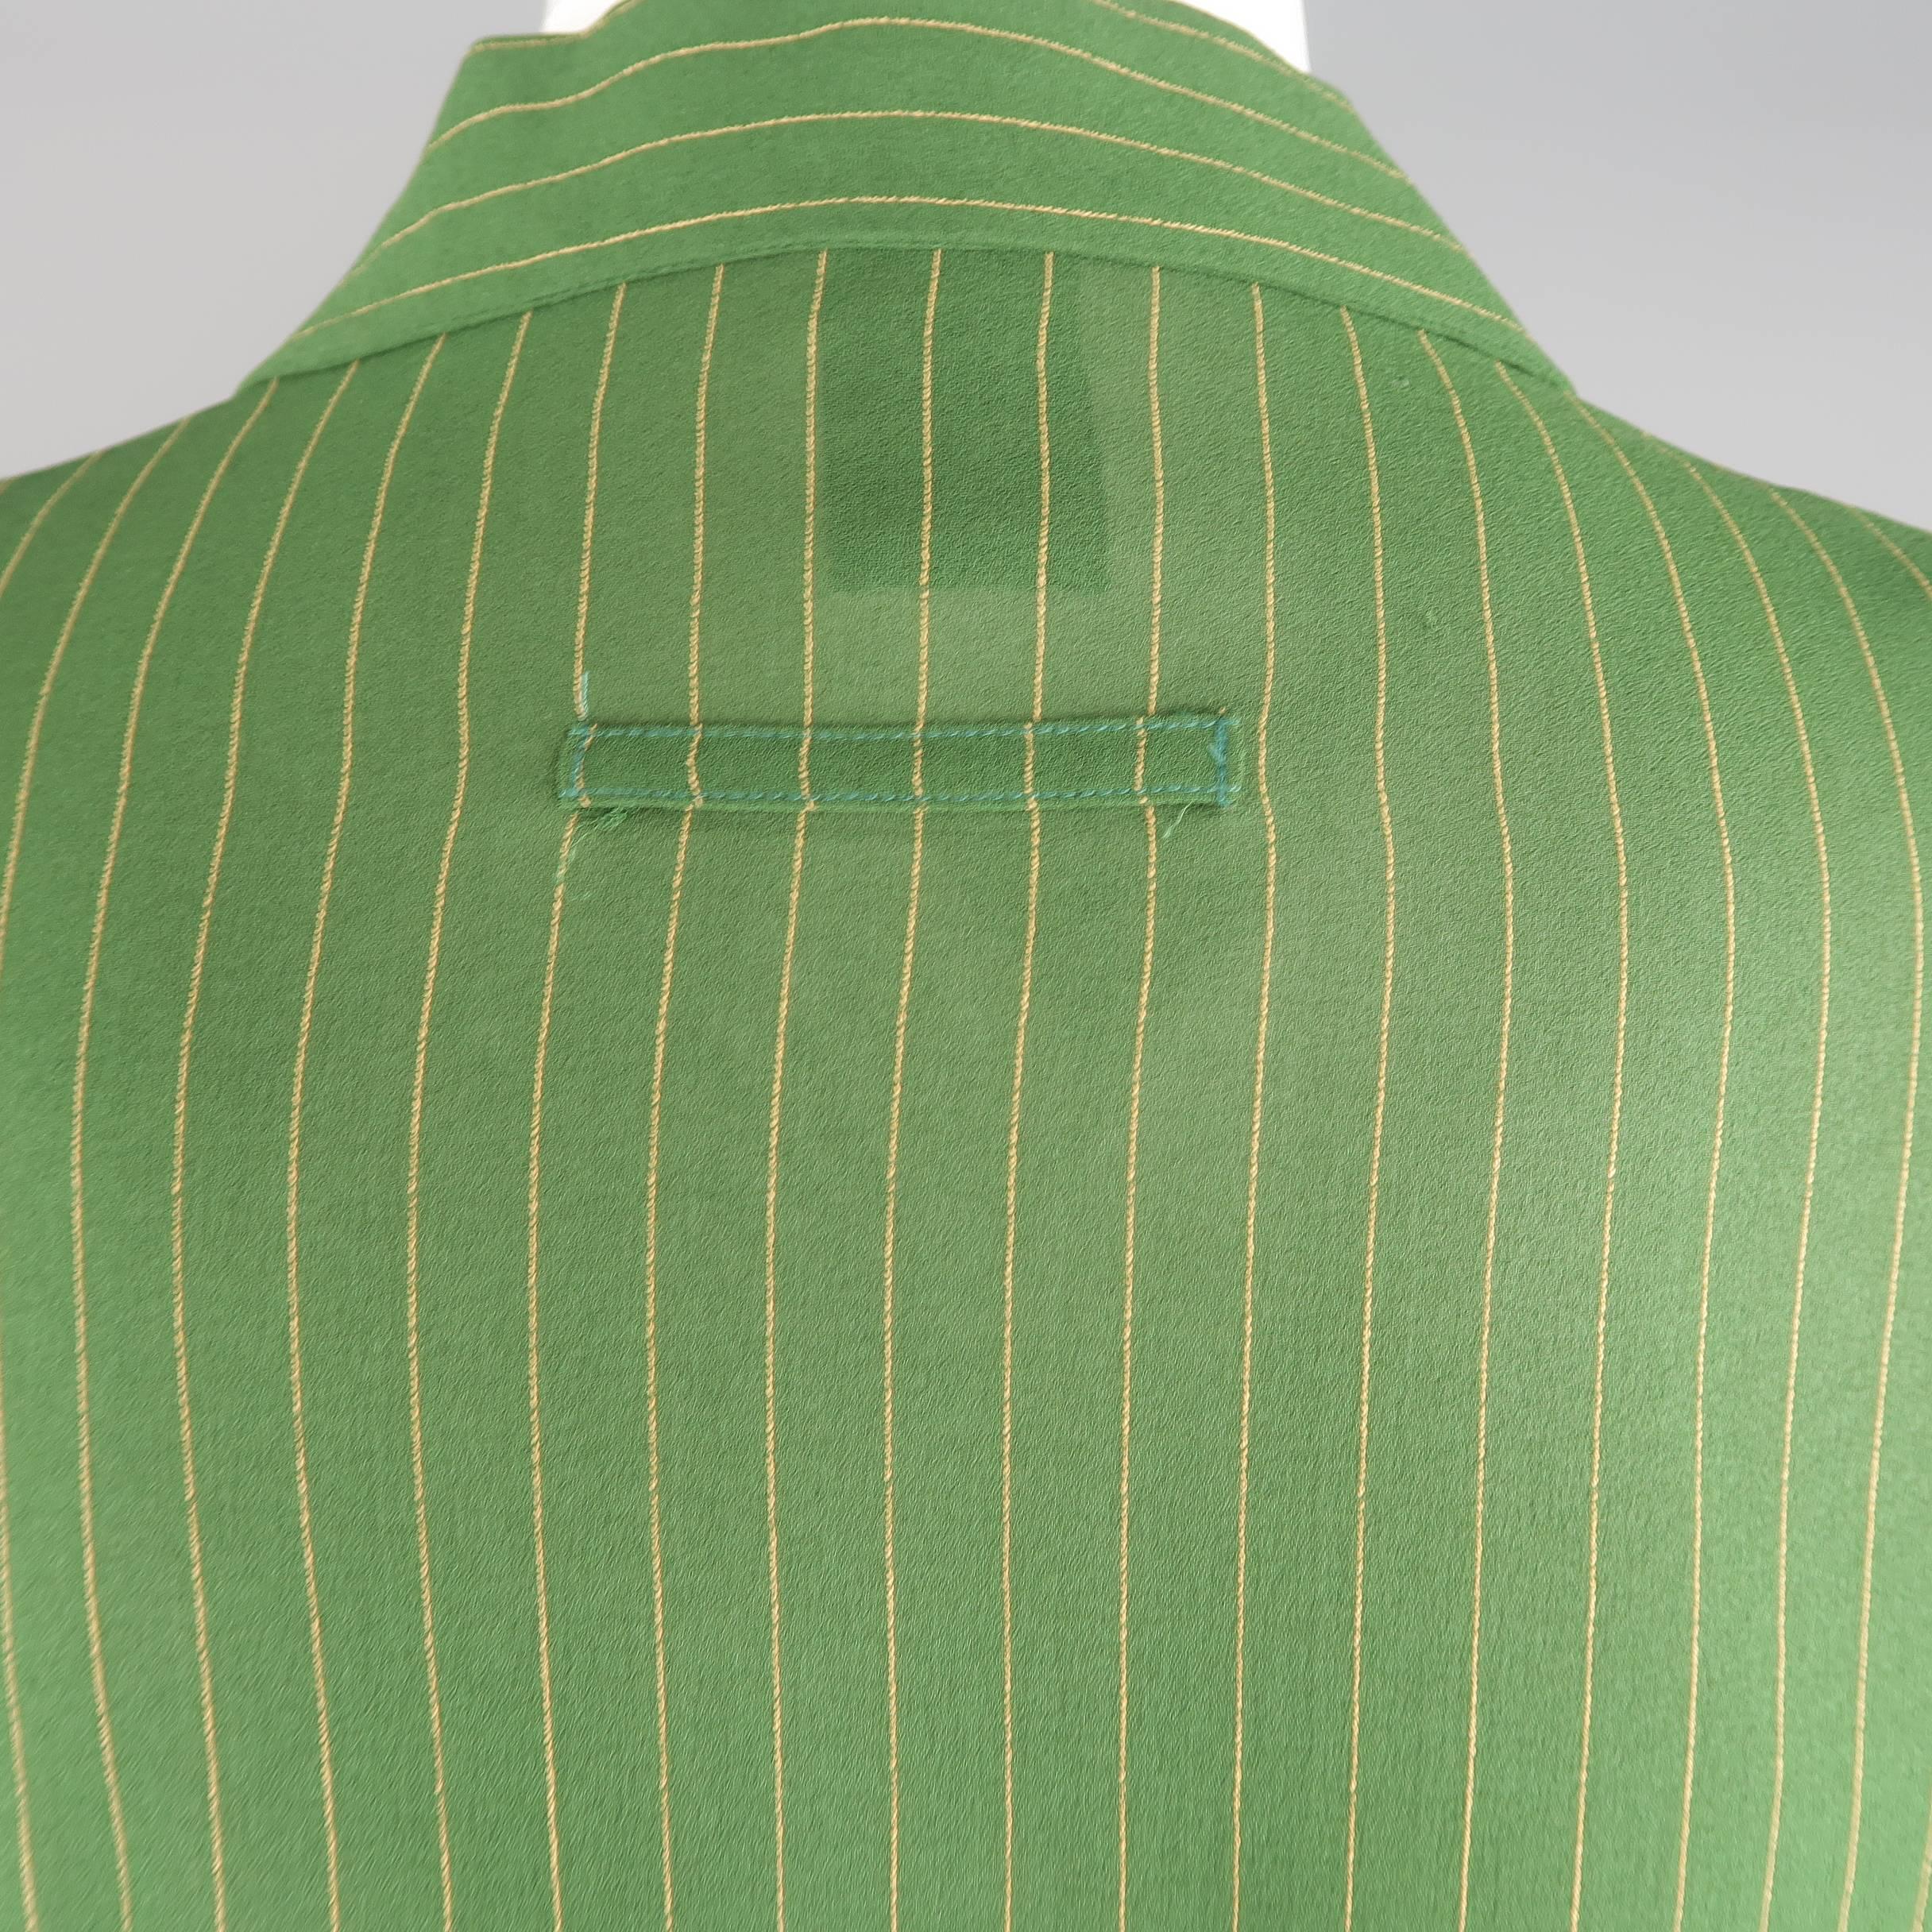 Gray Jean Paul Gaultier Men's Green and Yellow Pinstripe Crepe French Cuff Shirt